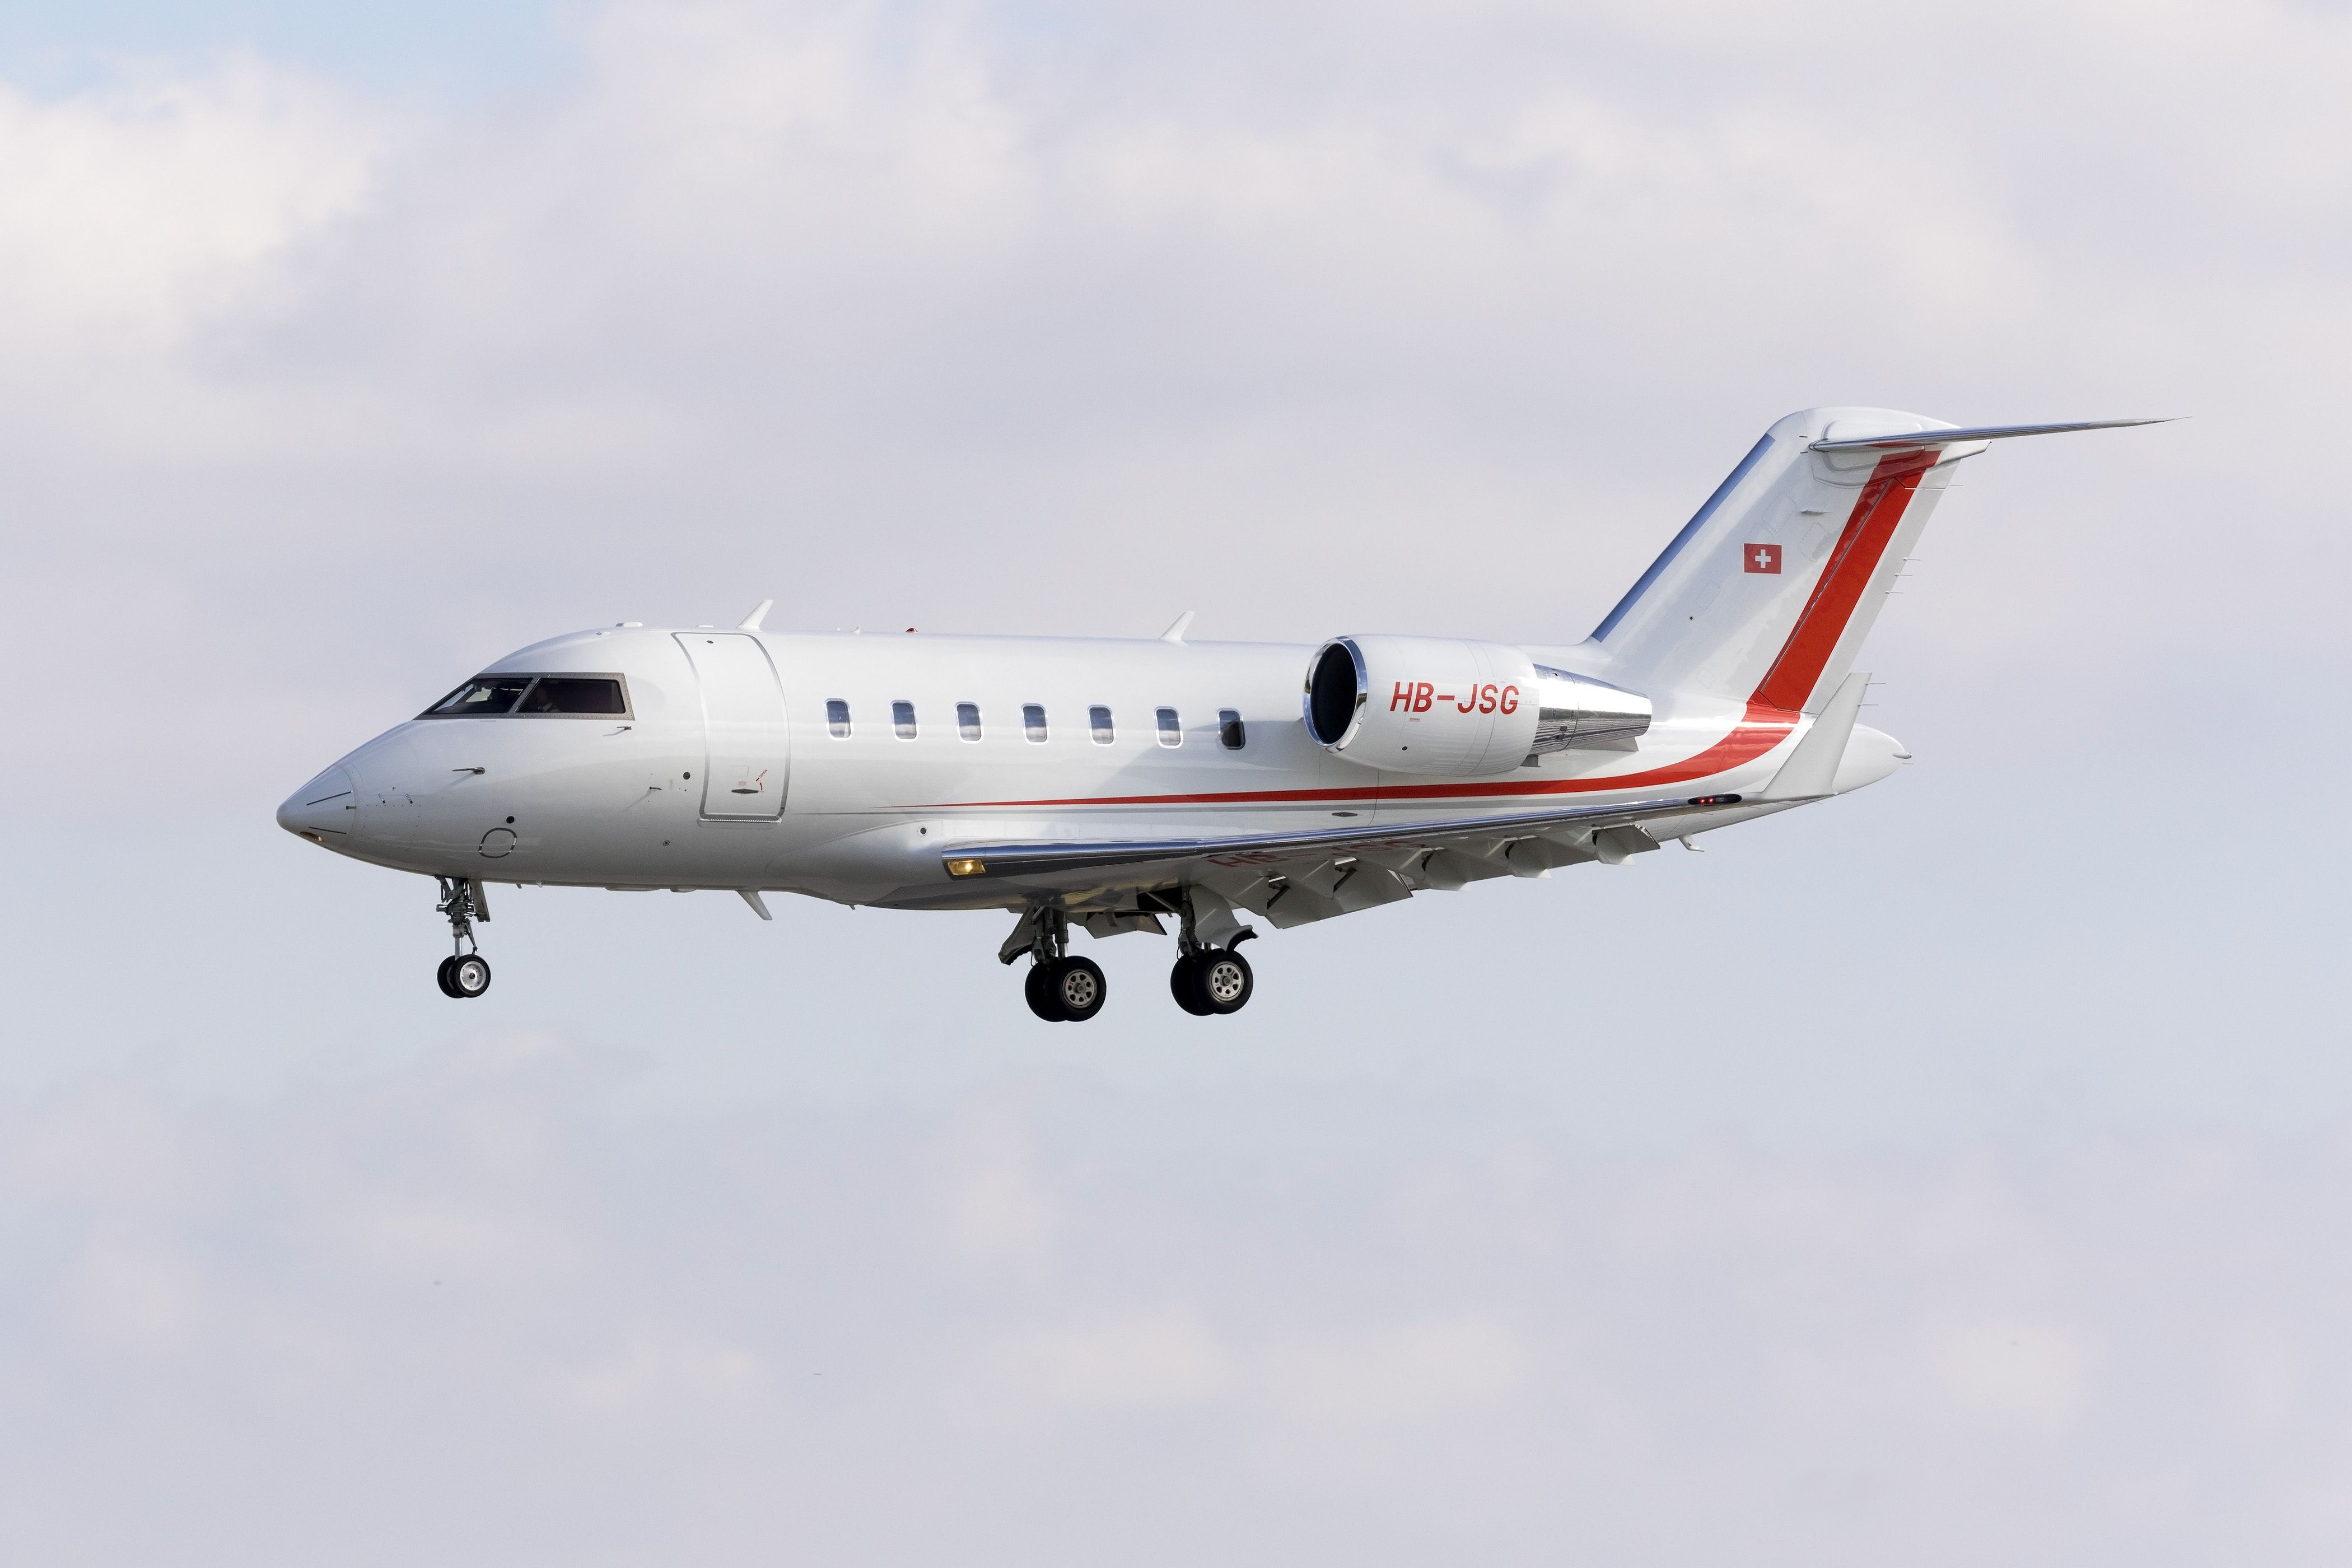 A Bombardier Challenger 605 flying in the sky.